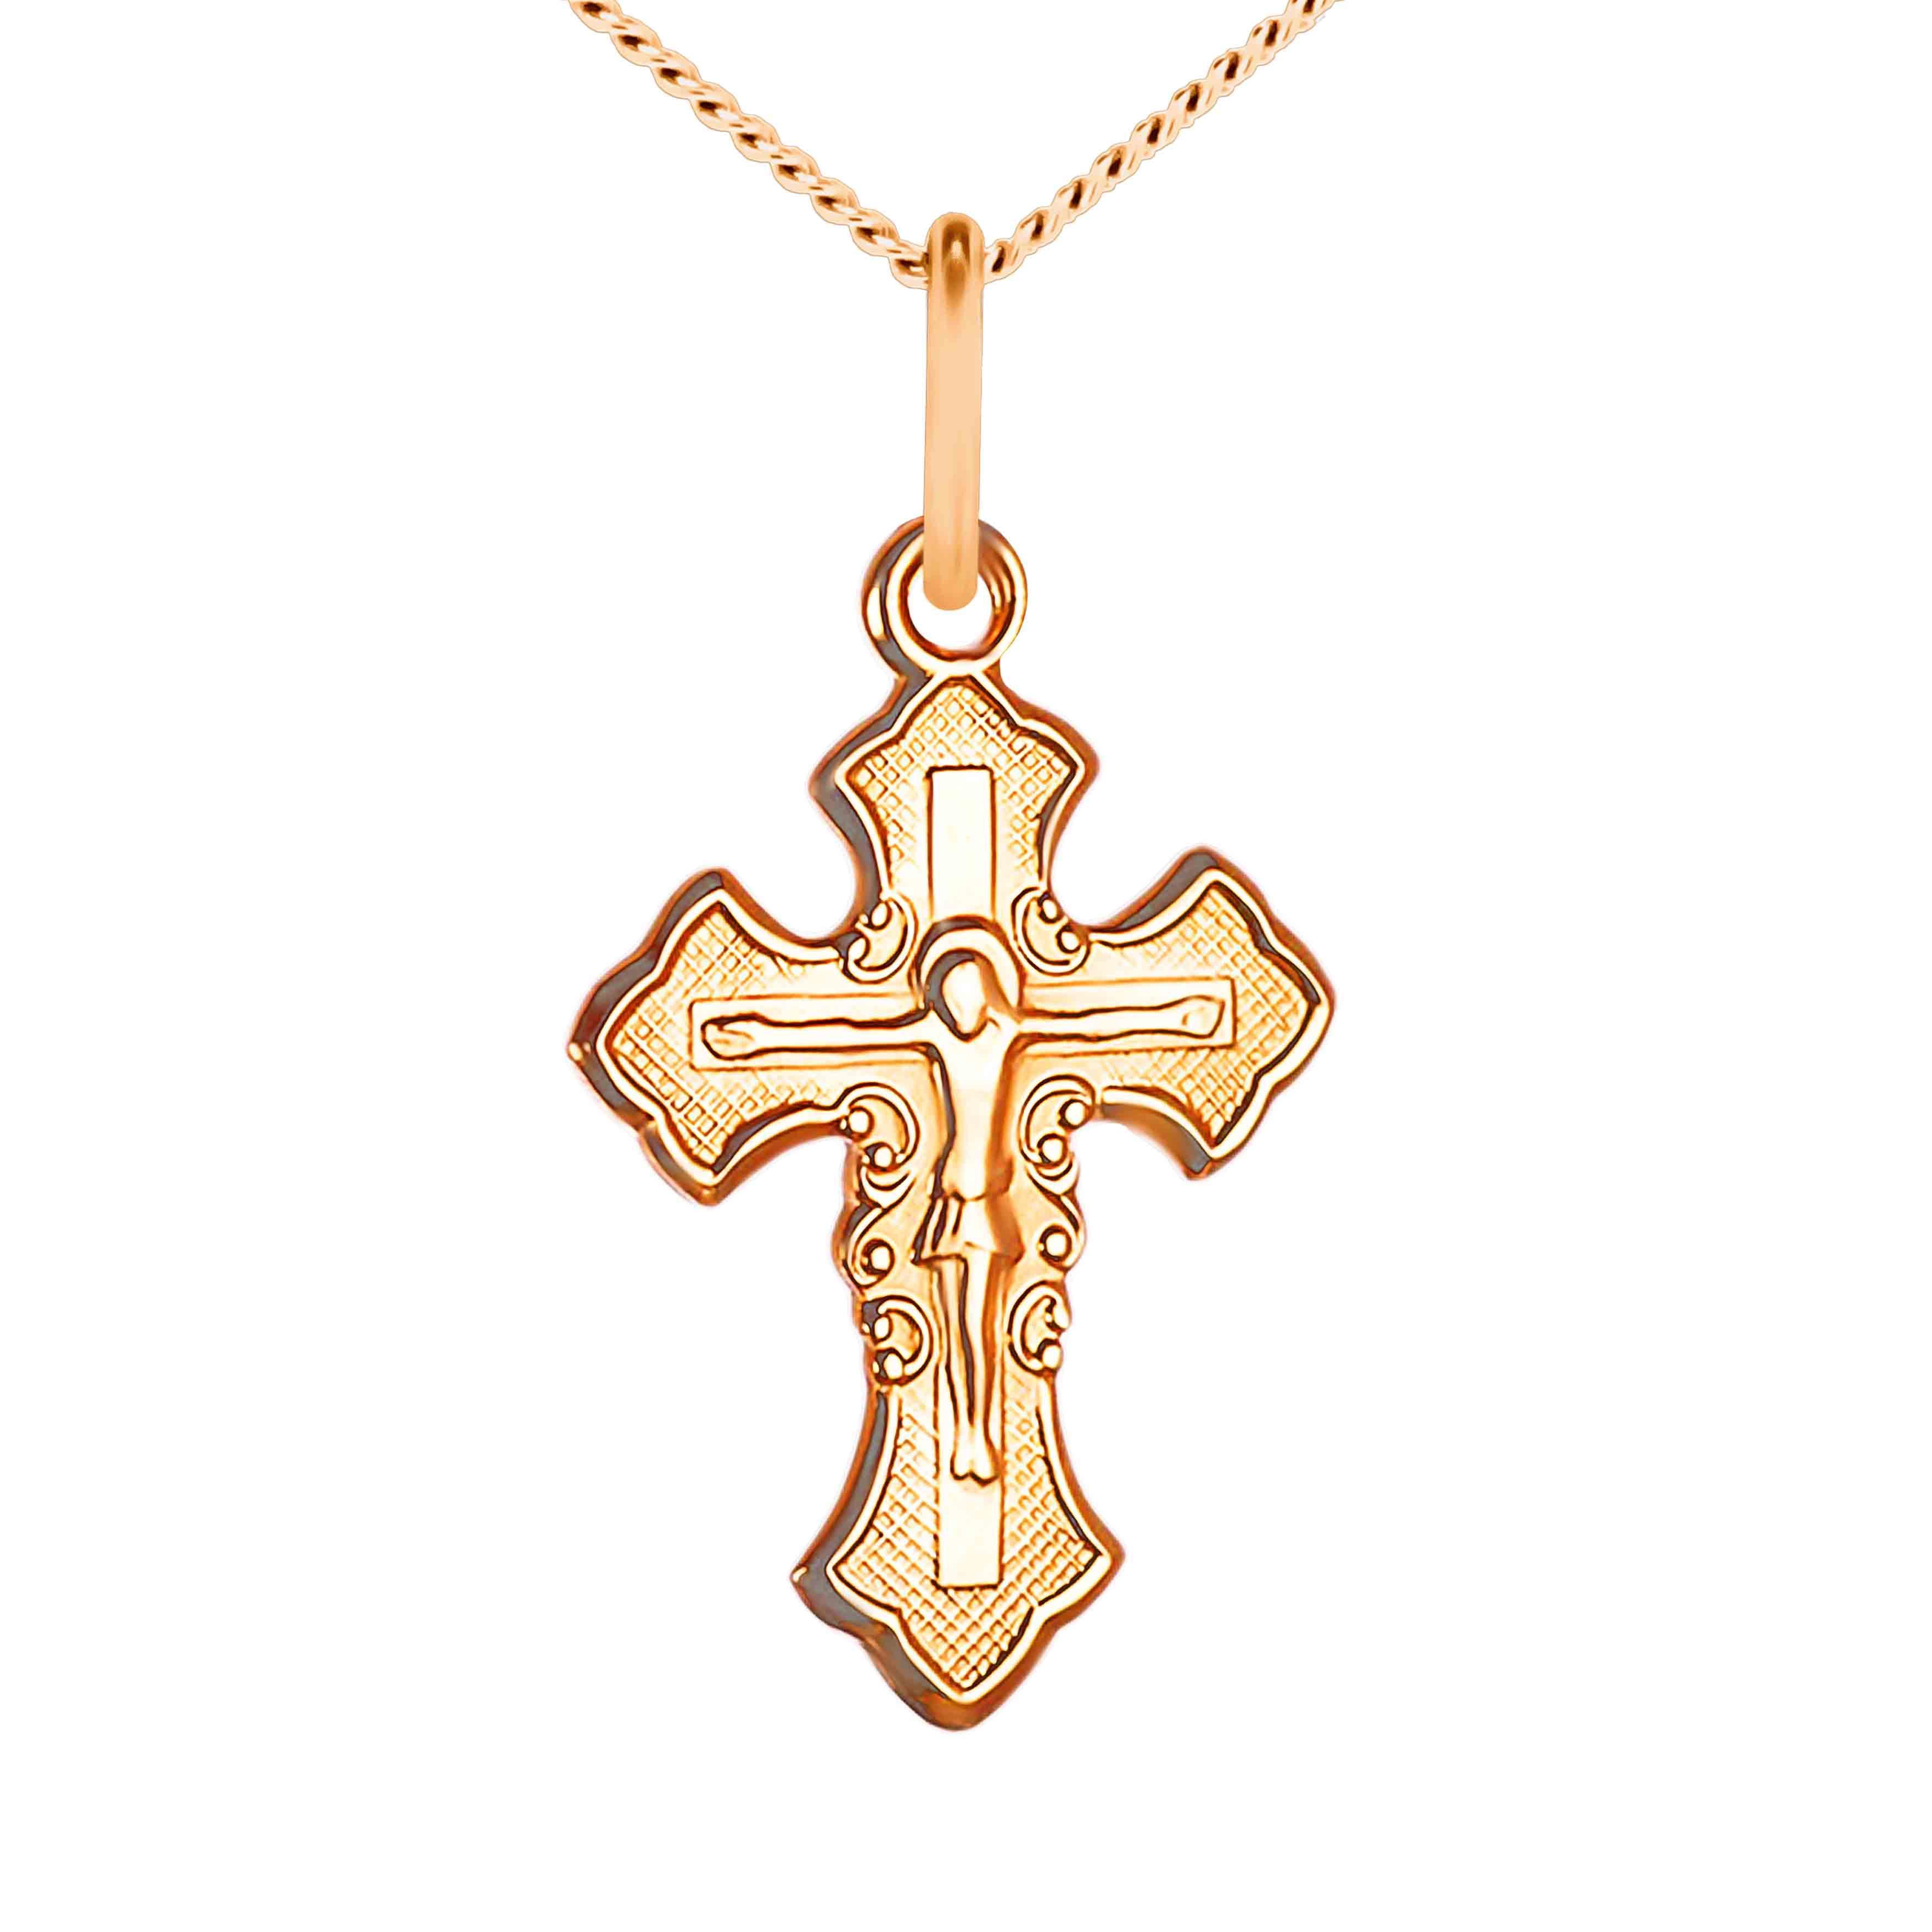 Christening Cross for Boys with Chain made of 14K Yellow Gold |  OramaWorld.com